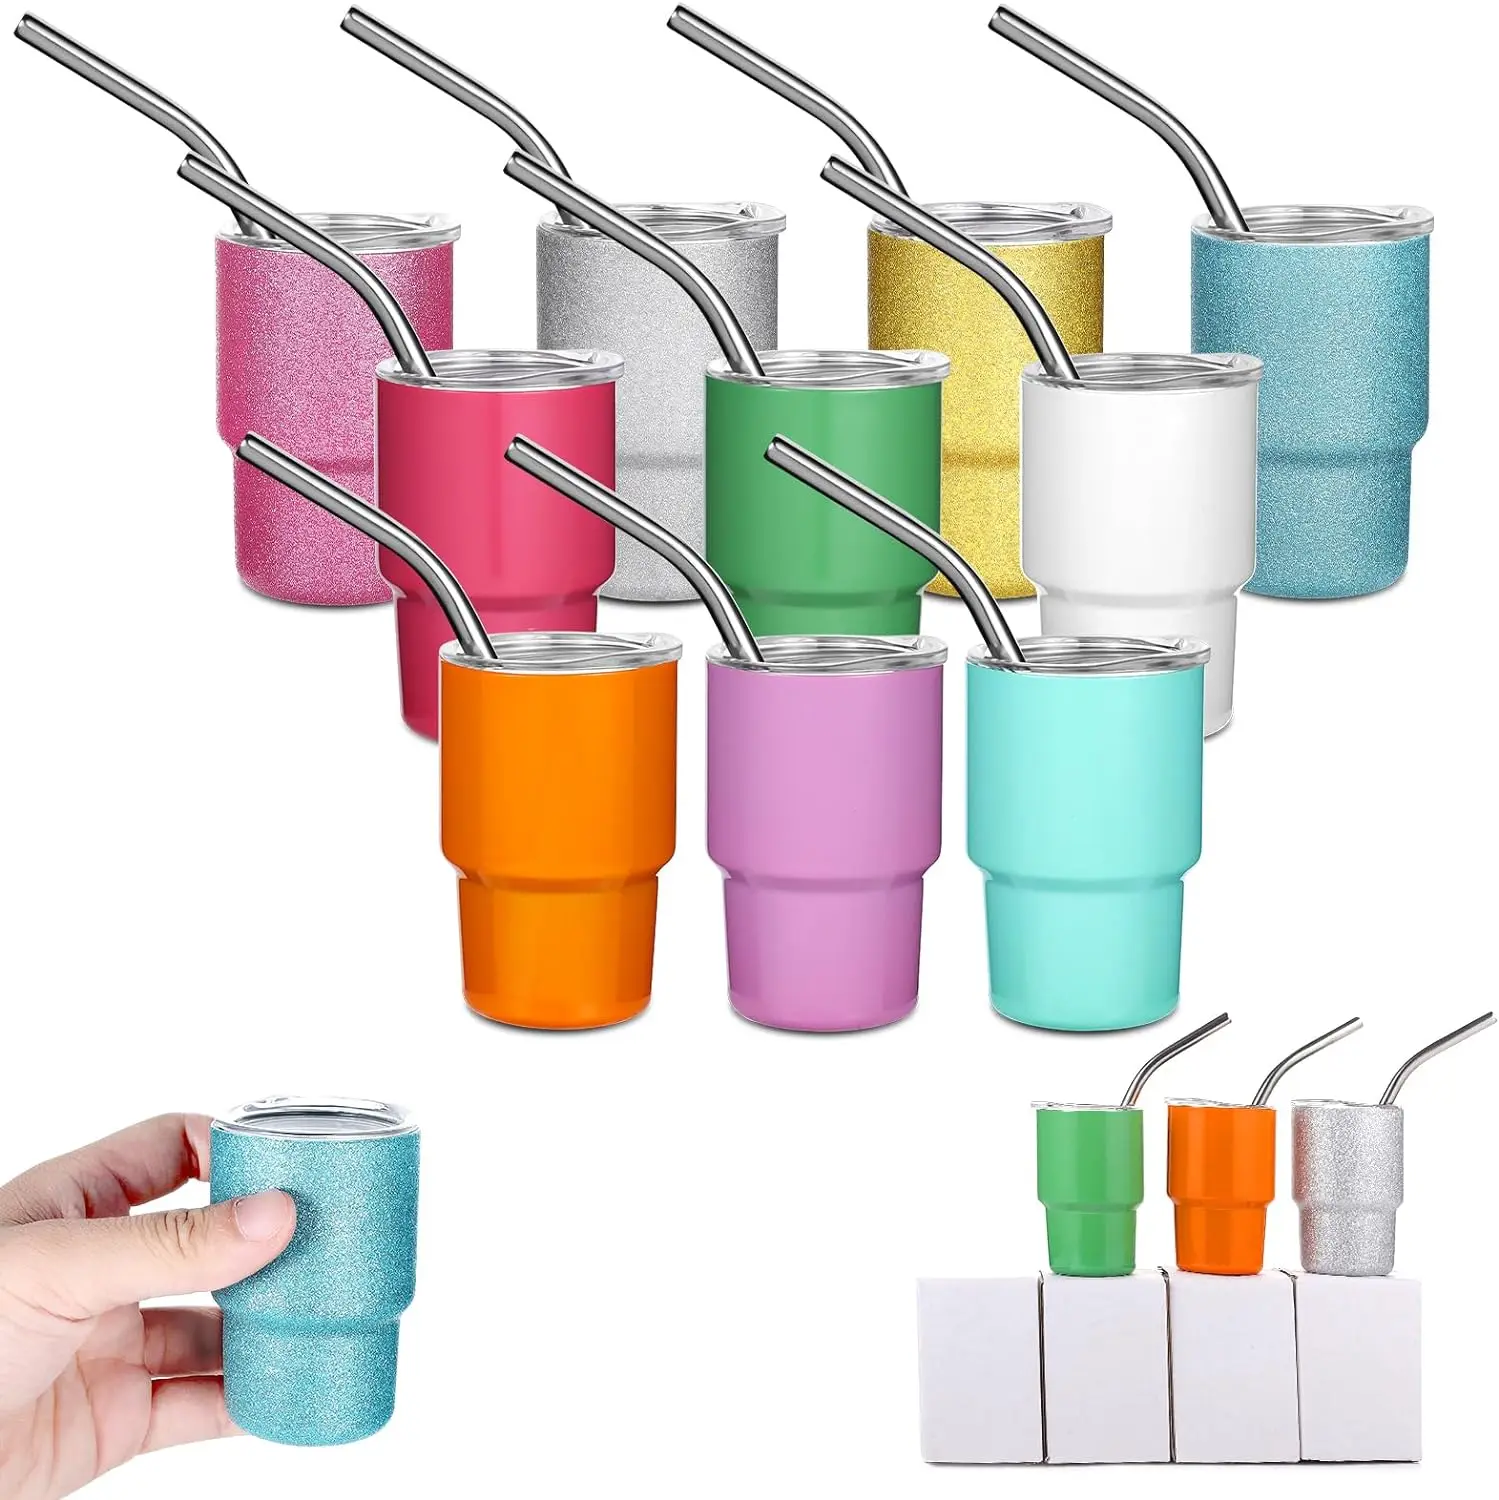 

10 Pcs Mini Tumbler Shot Glass with Straw,2oz Sublimation Shot Glass Tumblers Set Double Wall Vacuum Insulated Shot Glasses Cups